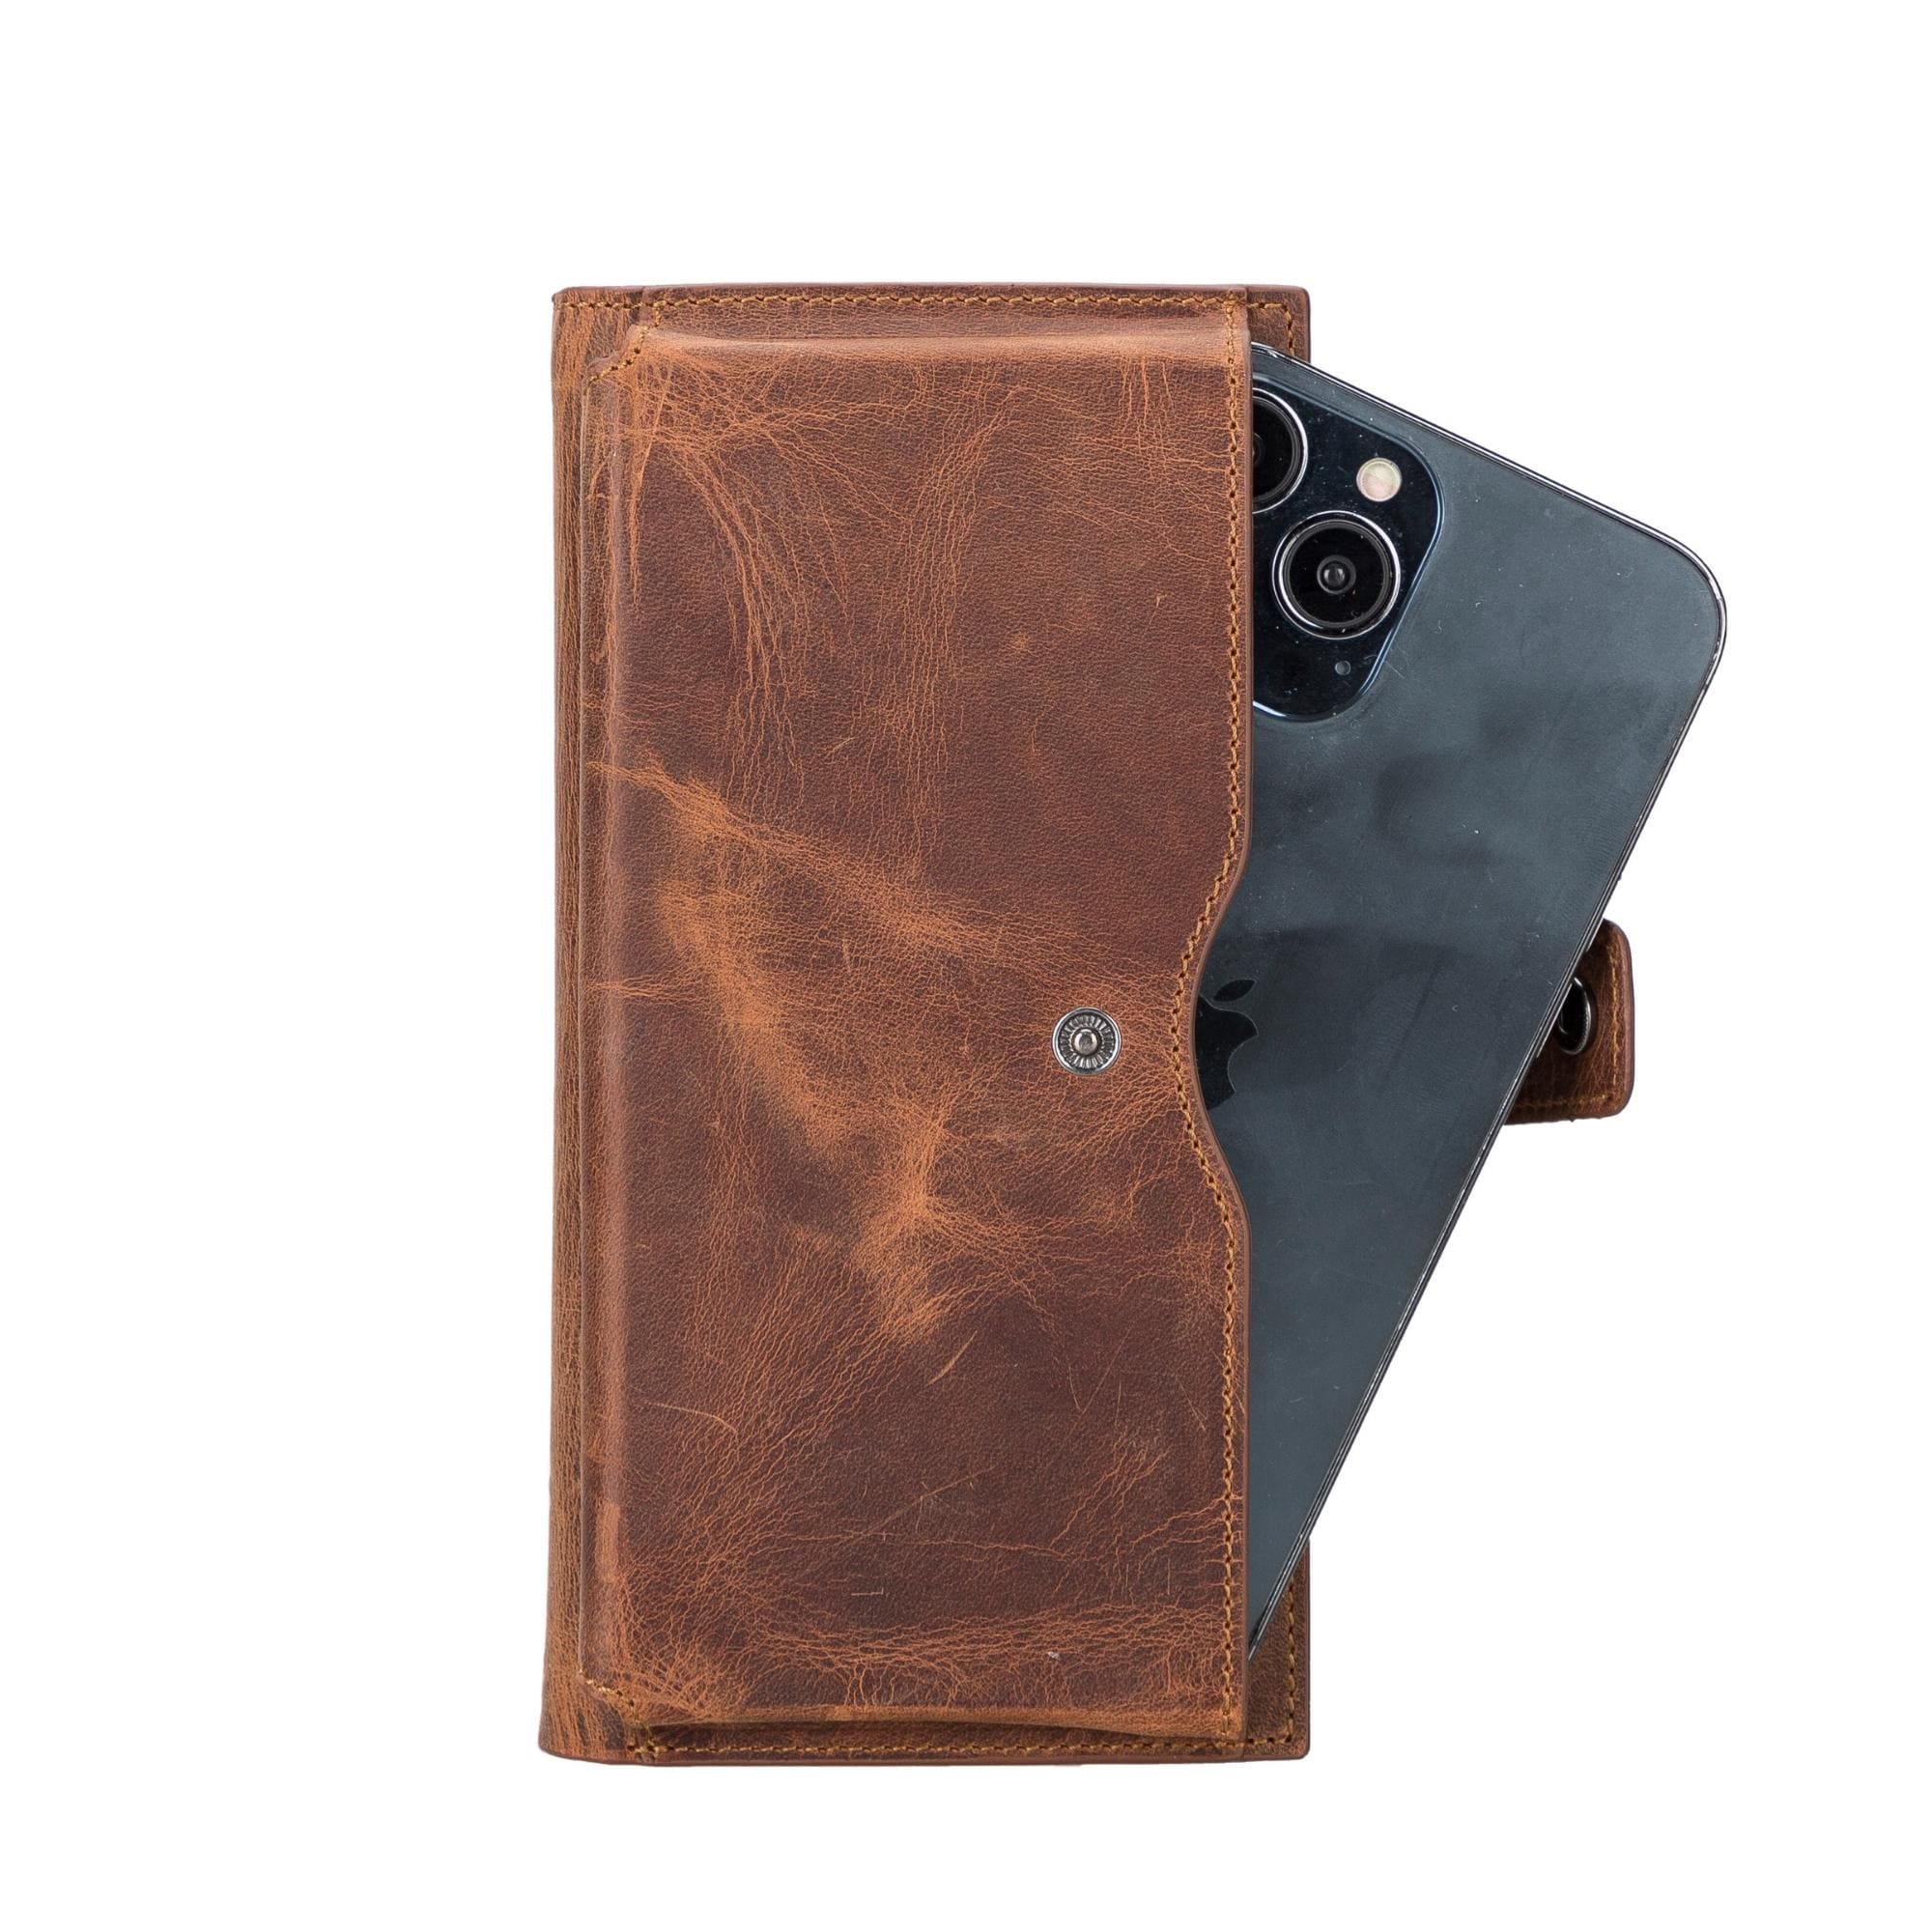 Riverton Leather Wallet for Women with Phone Section - Antic Brown - TORONATA